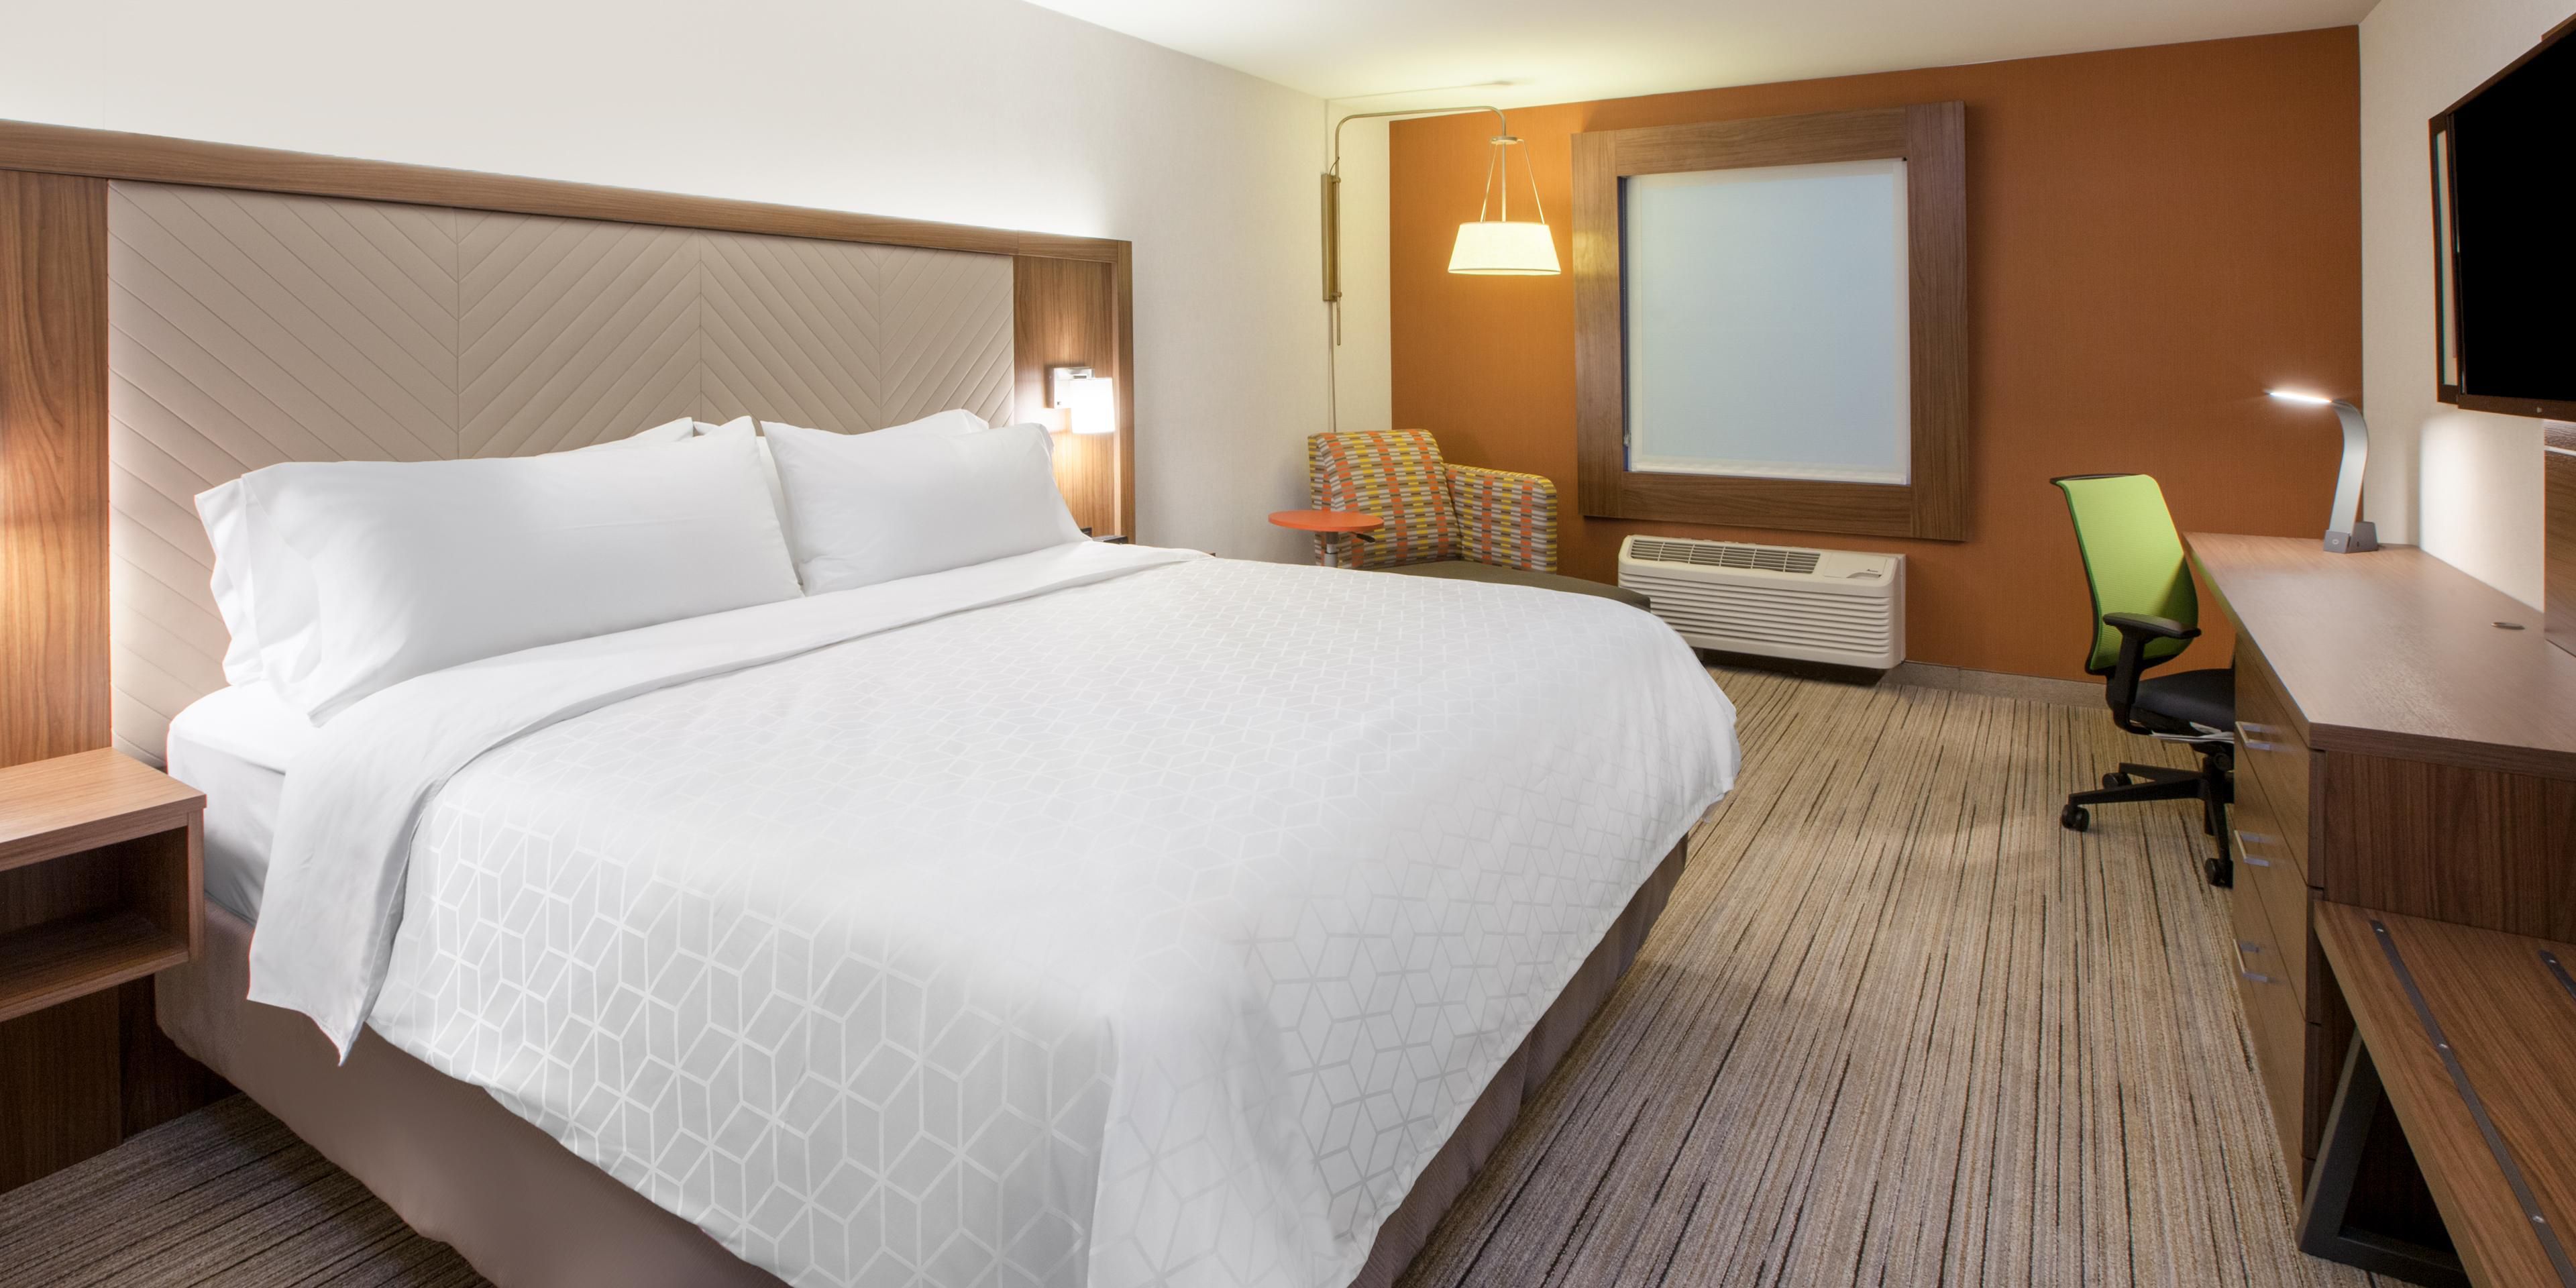 Unwind and spread out in our spacious one and two bedded rooms. Plenty of space for work and play!